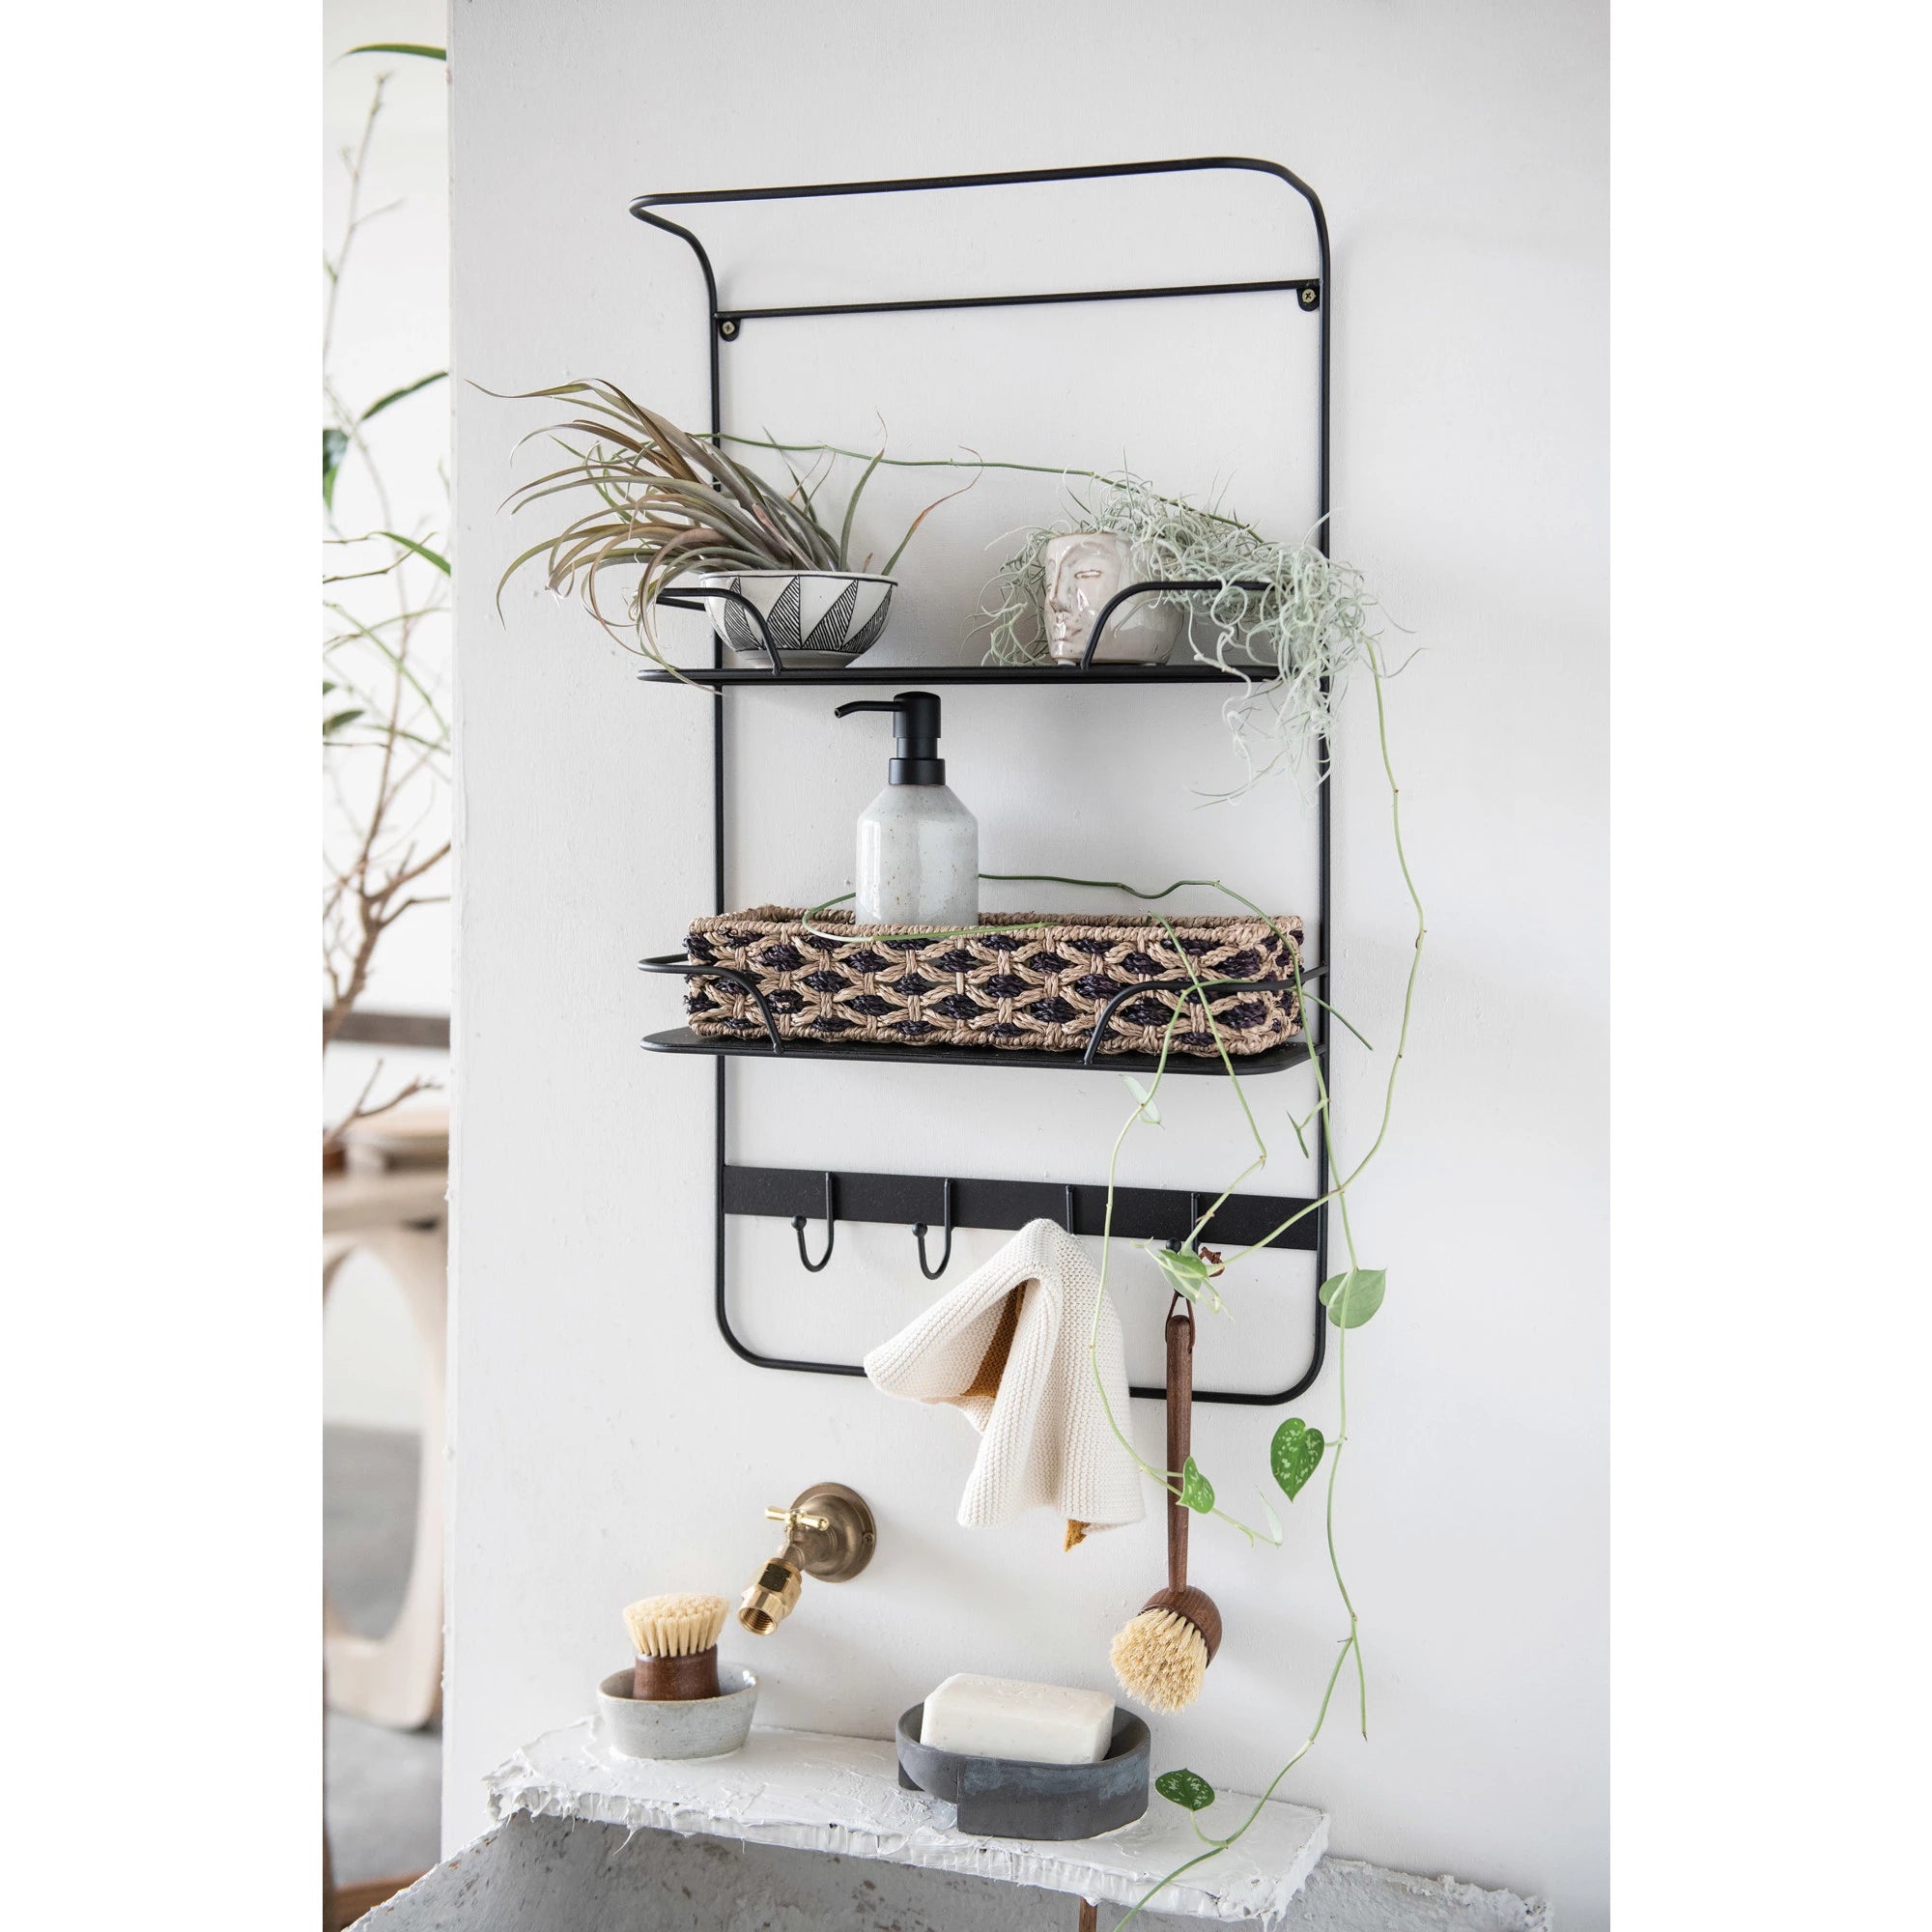 A wall-mounted, three-tiered black metal shelf displaying various bathroom items including plants, towels, and toiletries, against a white wall in a Scottsdale, Arizona bungalow featuring a Bloomingville stoneware soap dispenser.